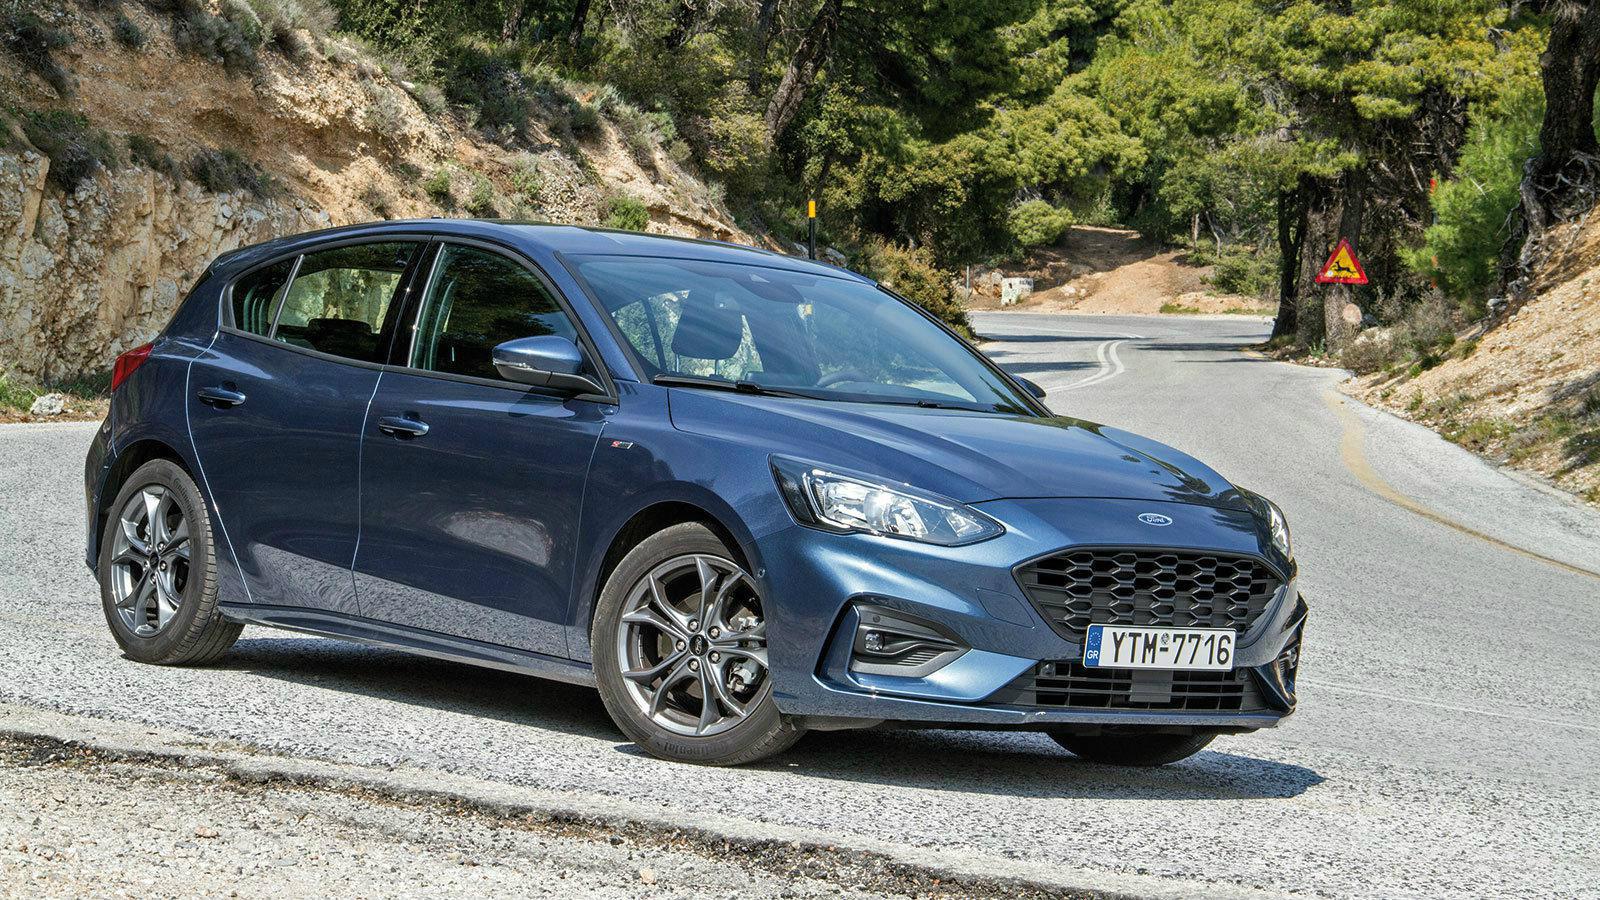 Ford Focus 1.0 EcoBoost 125 PS Business - 19.100 ευρώ